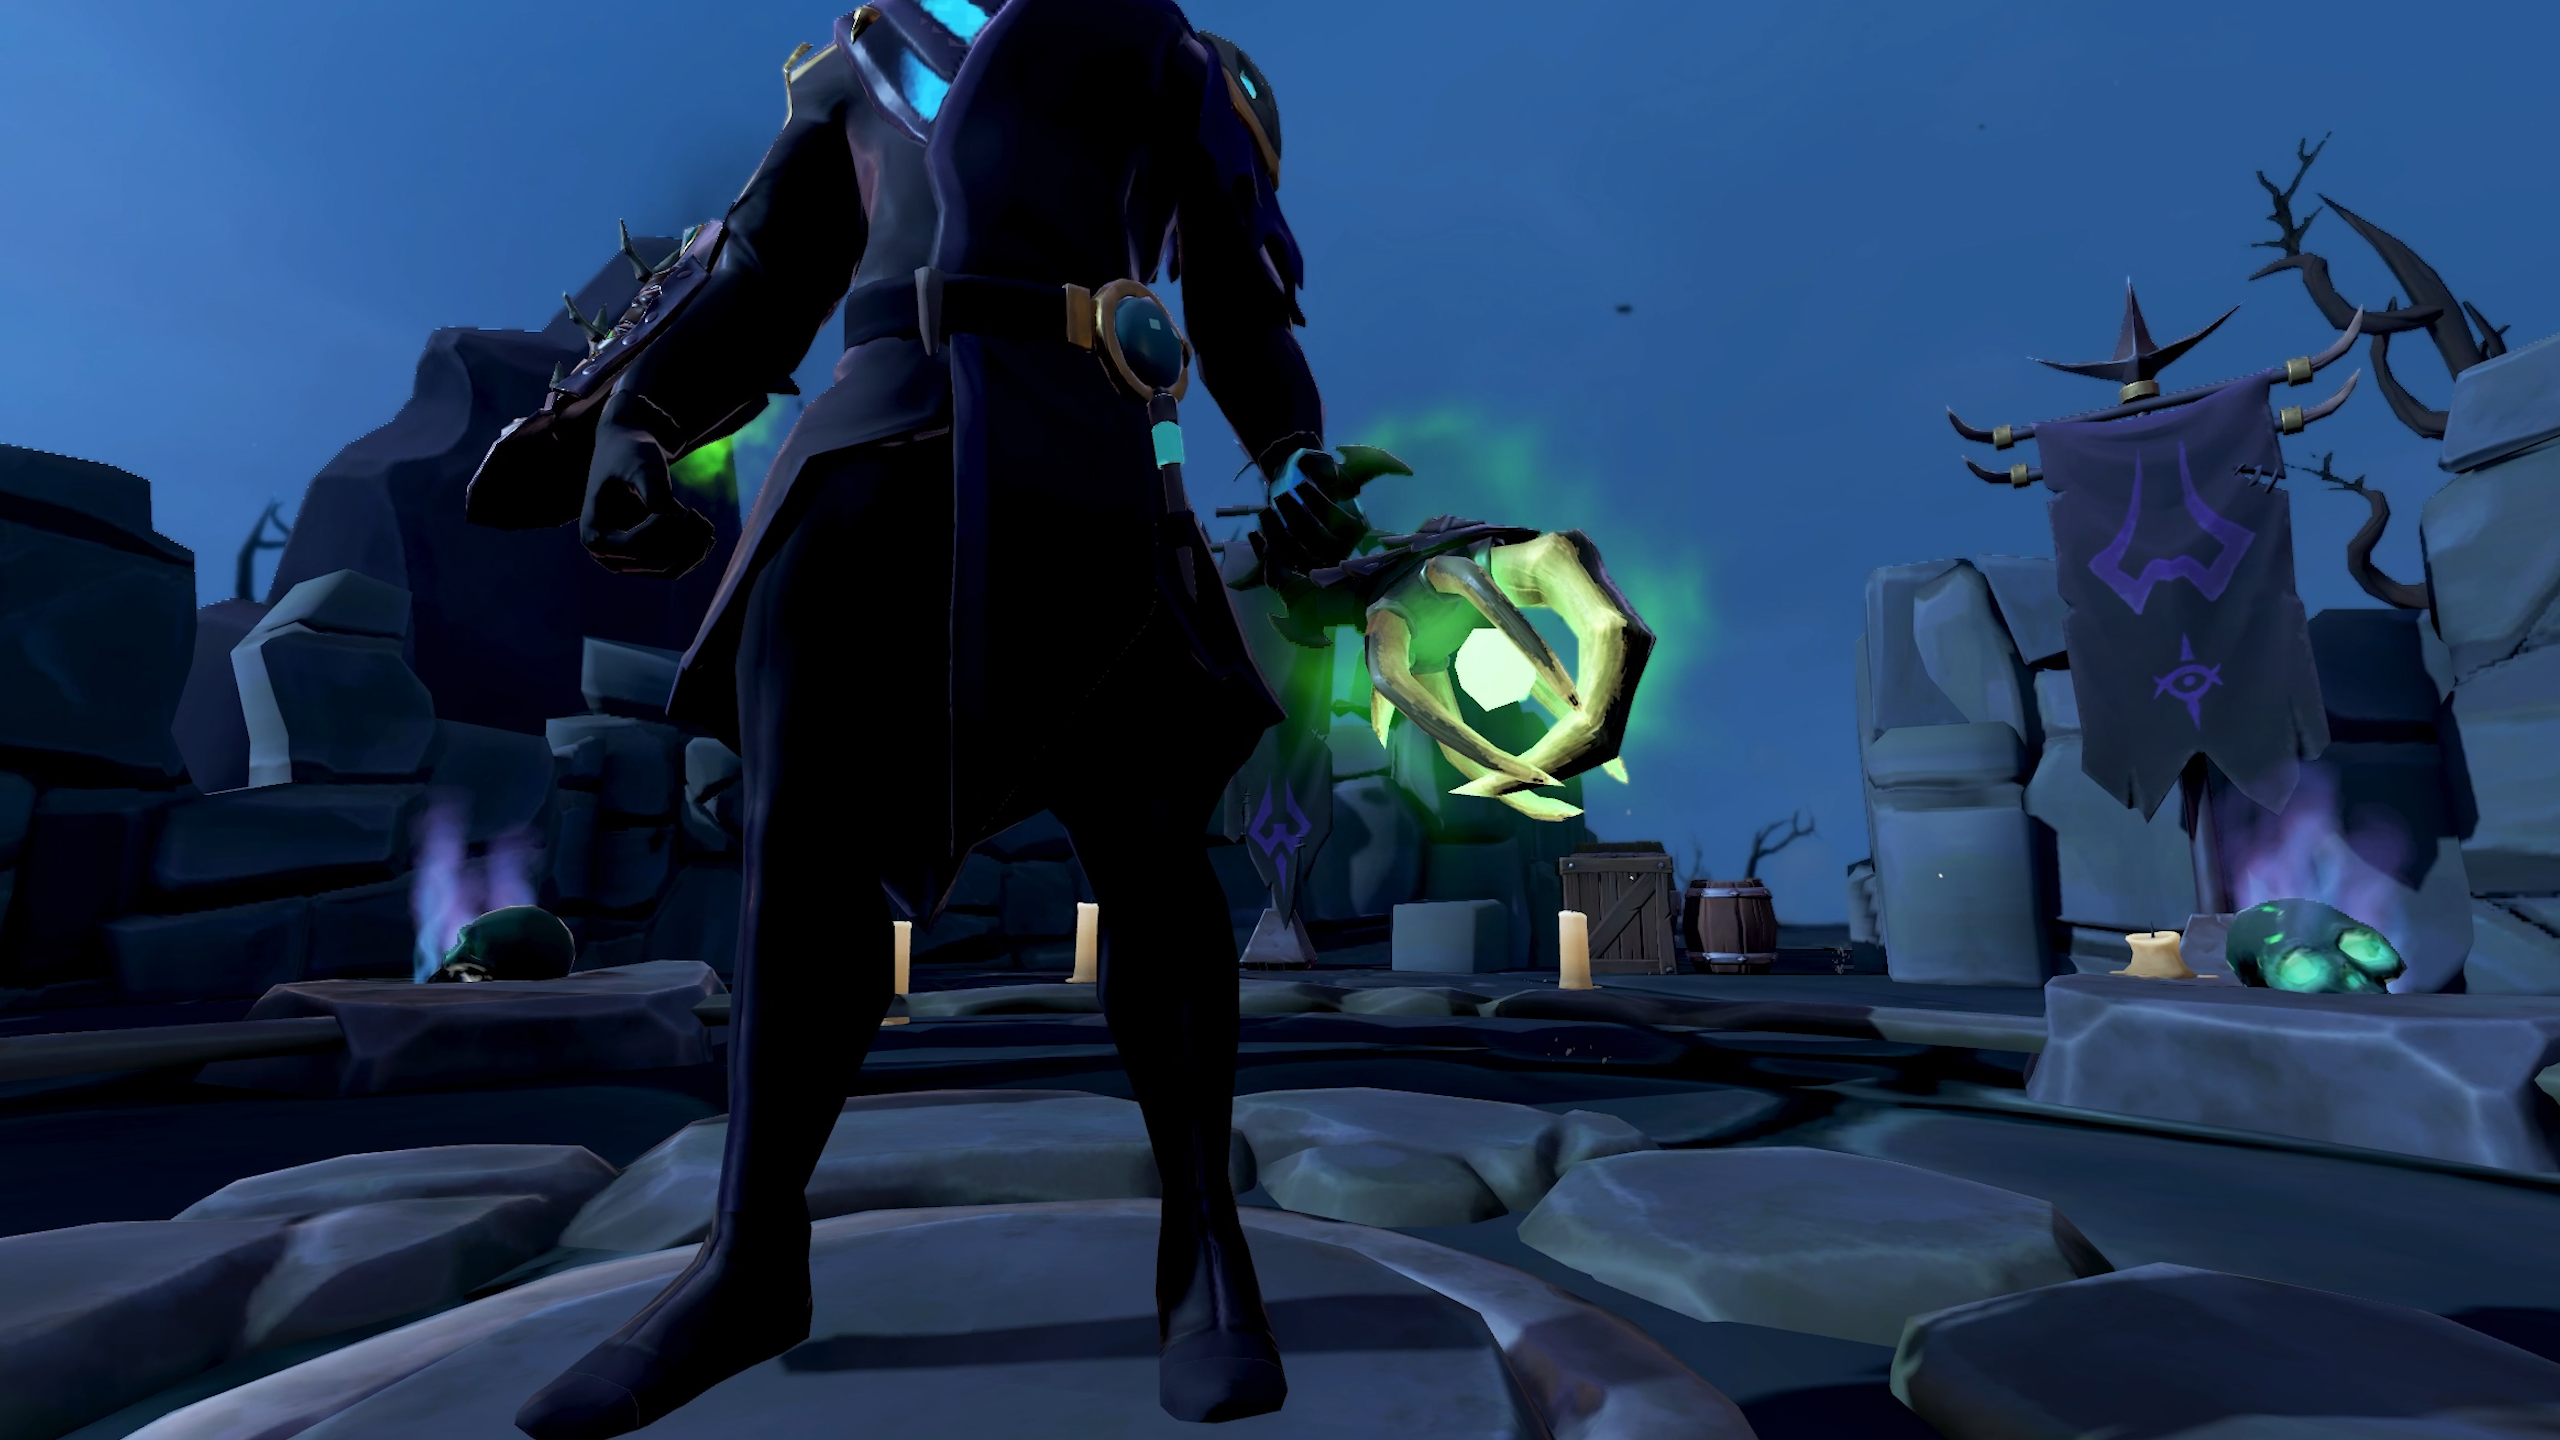 RuneScape has Released Vorkath: Battle Of Forinthry